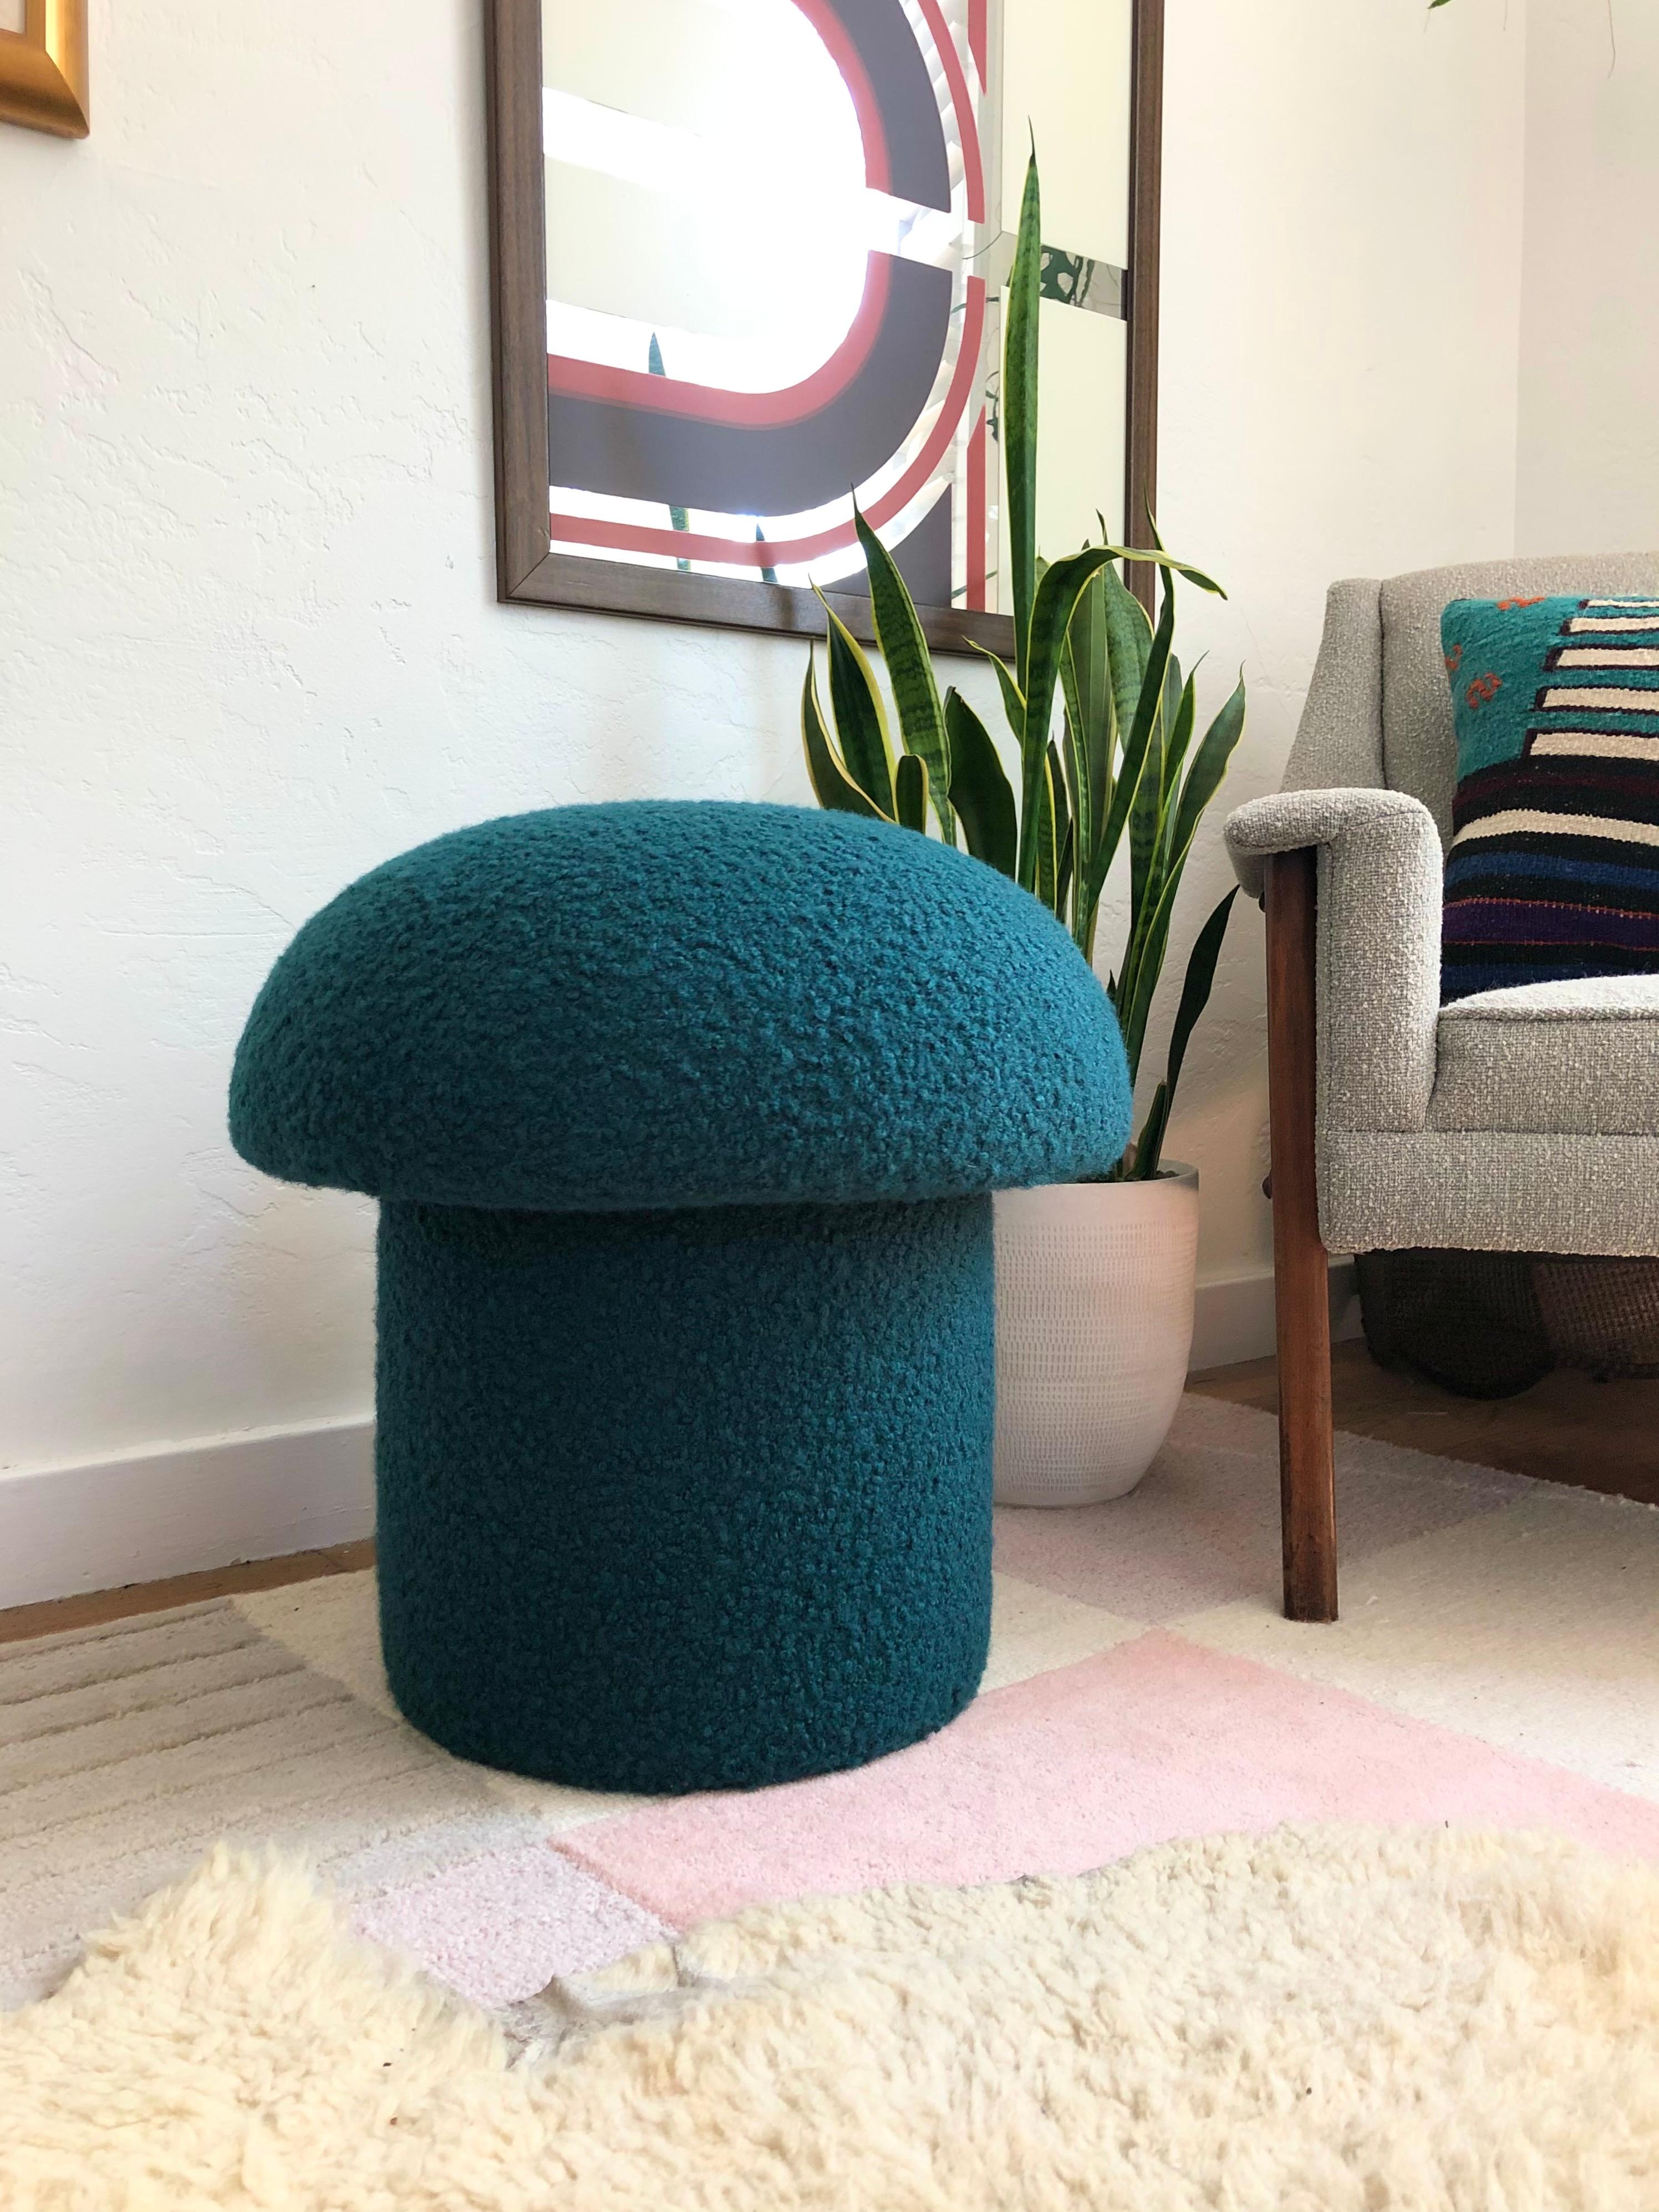 A handmade mushroom shaped ottoman, upholstered in a dark teal colored curly boucle fabric. Perfect for using as a footstool or extra occasional seating. A comfortable cushioned seat and sculptural accent piece.
Mushroom ottomans are made to order,